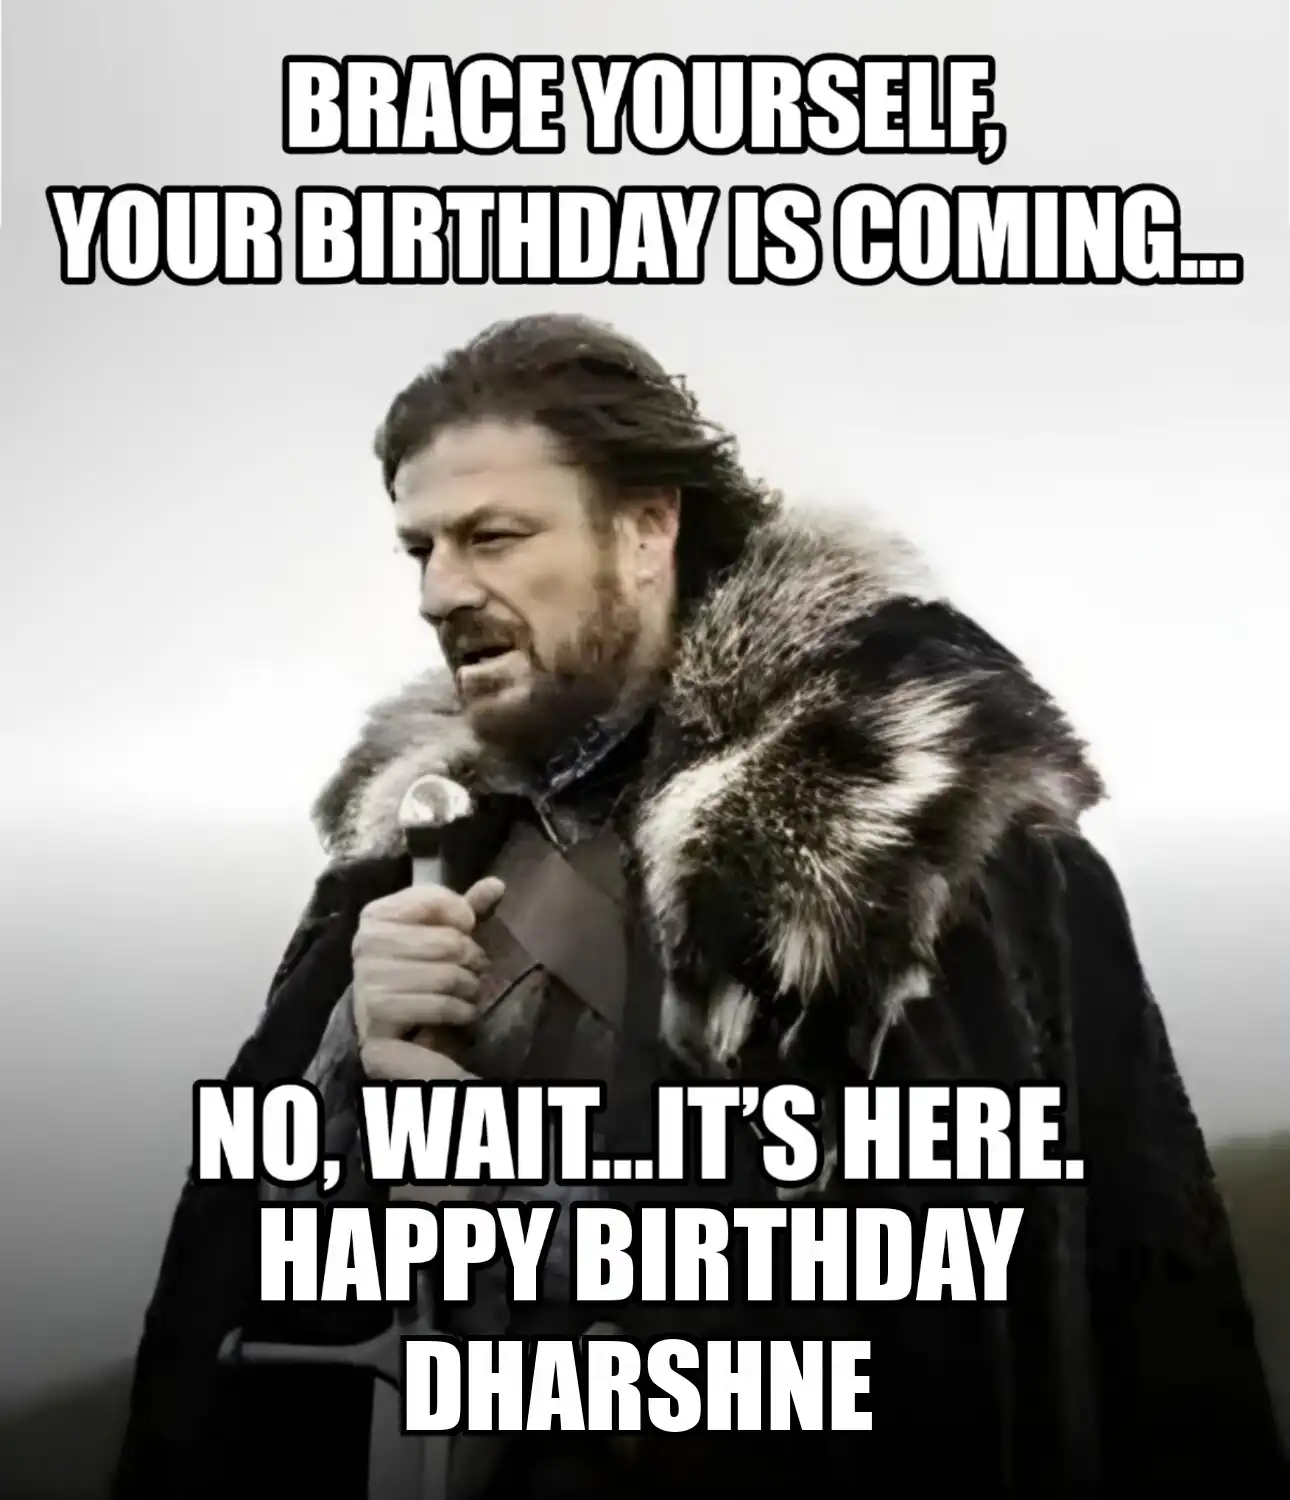 Happy Birthday Dharshne Brace Yourself Your Birthday Is Coming Meme